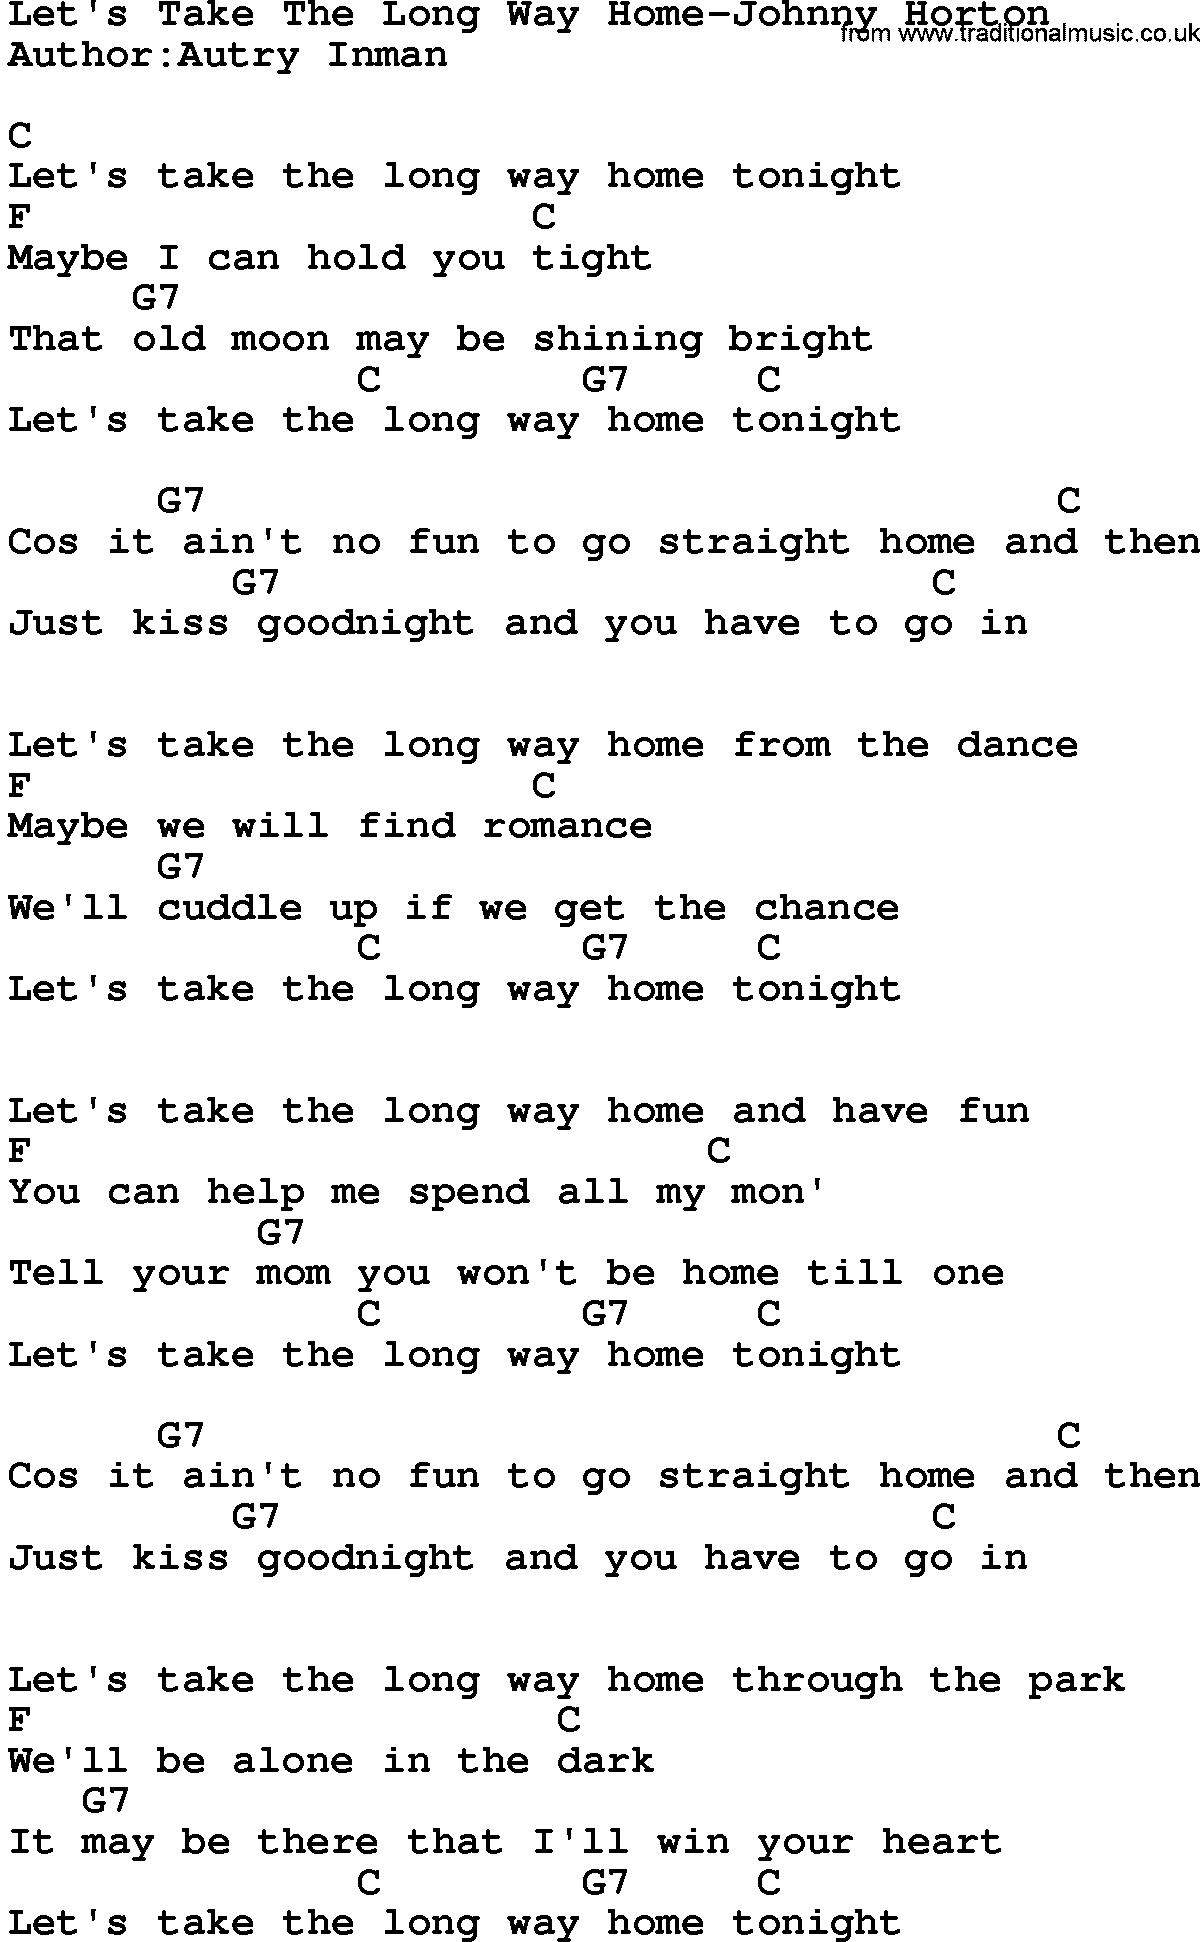 Country music song: Let's Take The Long Way Home-Johnny Horton lyrics and chords